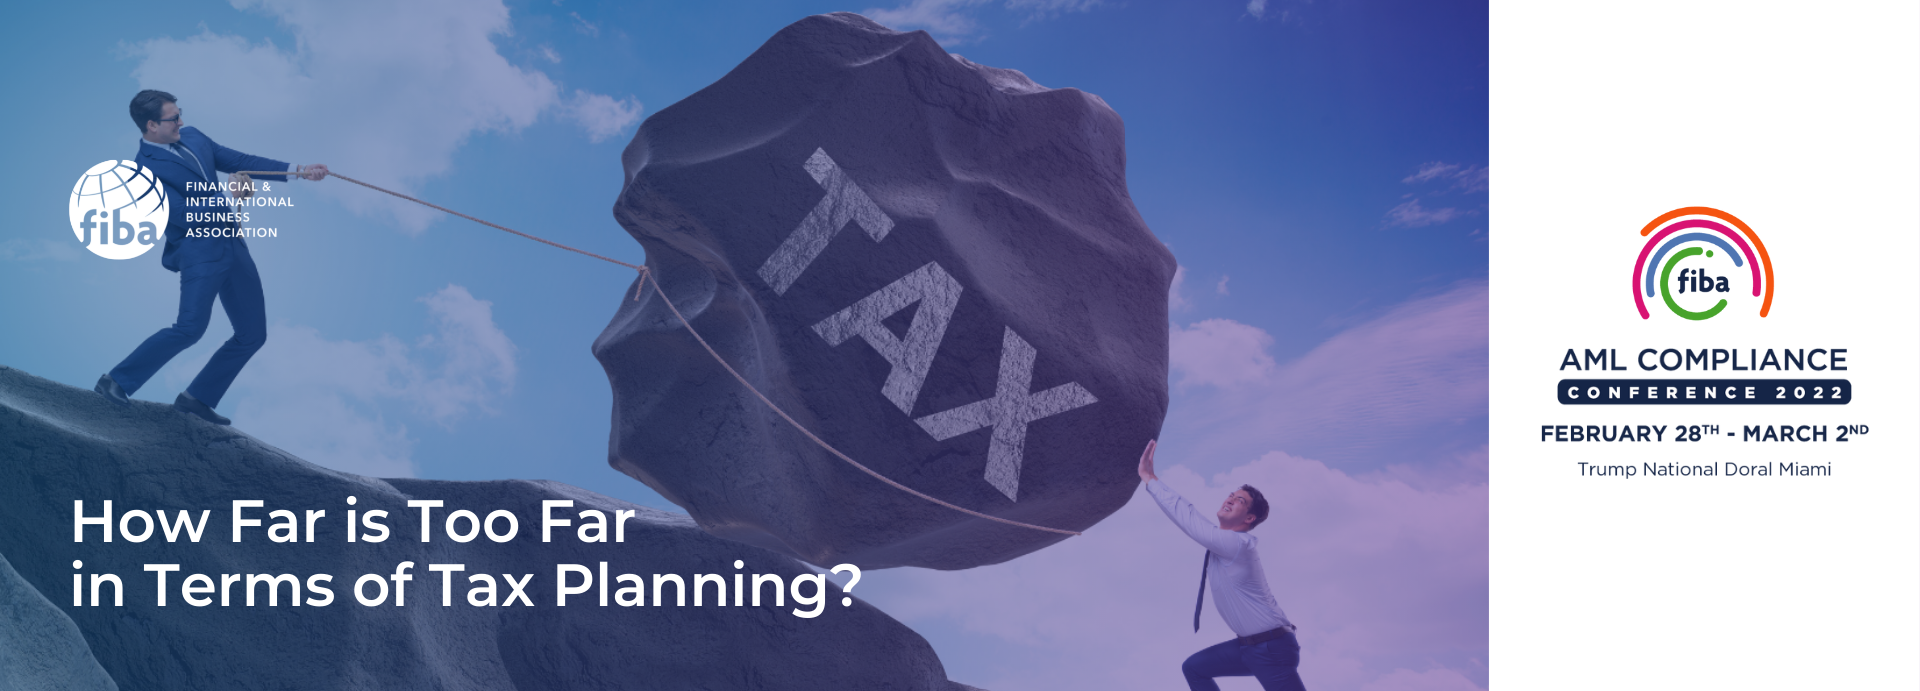 How Far is Too Far in Terms of Tax Planning?